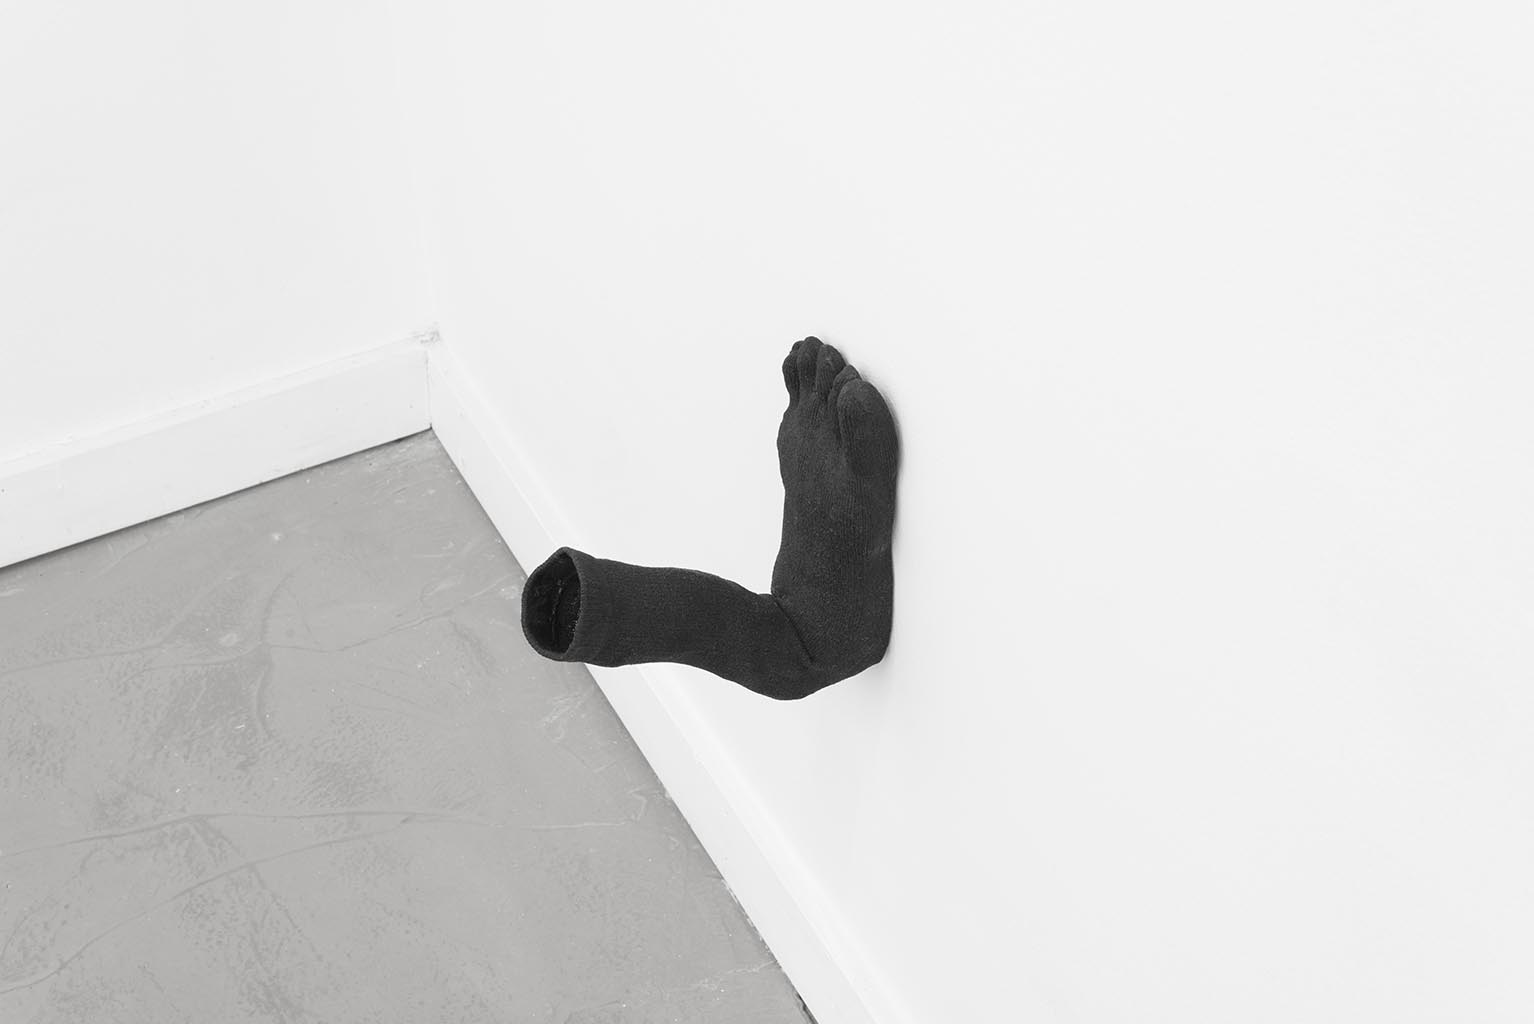 No Title (Ol' Slew Foot), 2015, gesso, acrylic paint, fabric stiffener, cotton socks,  8.5 x 4 x 8 in